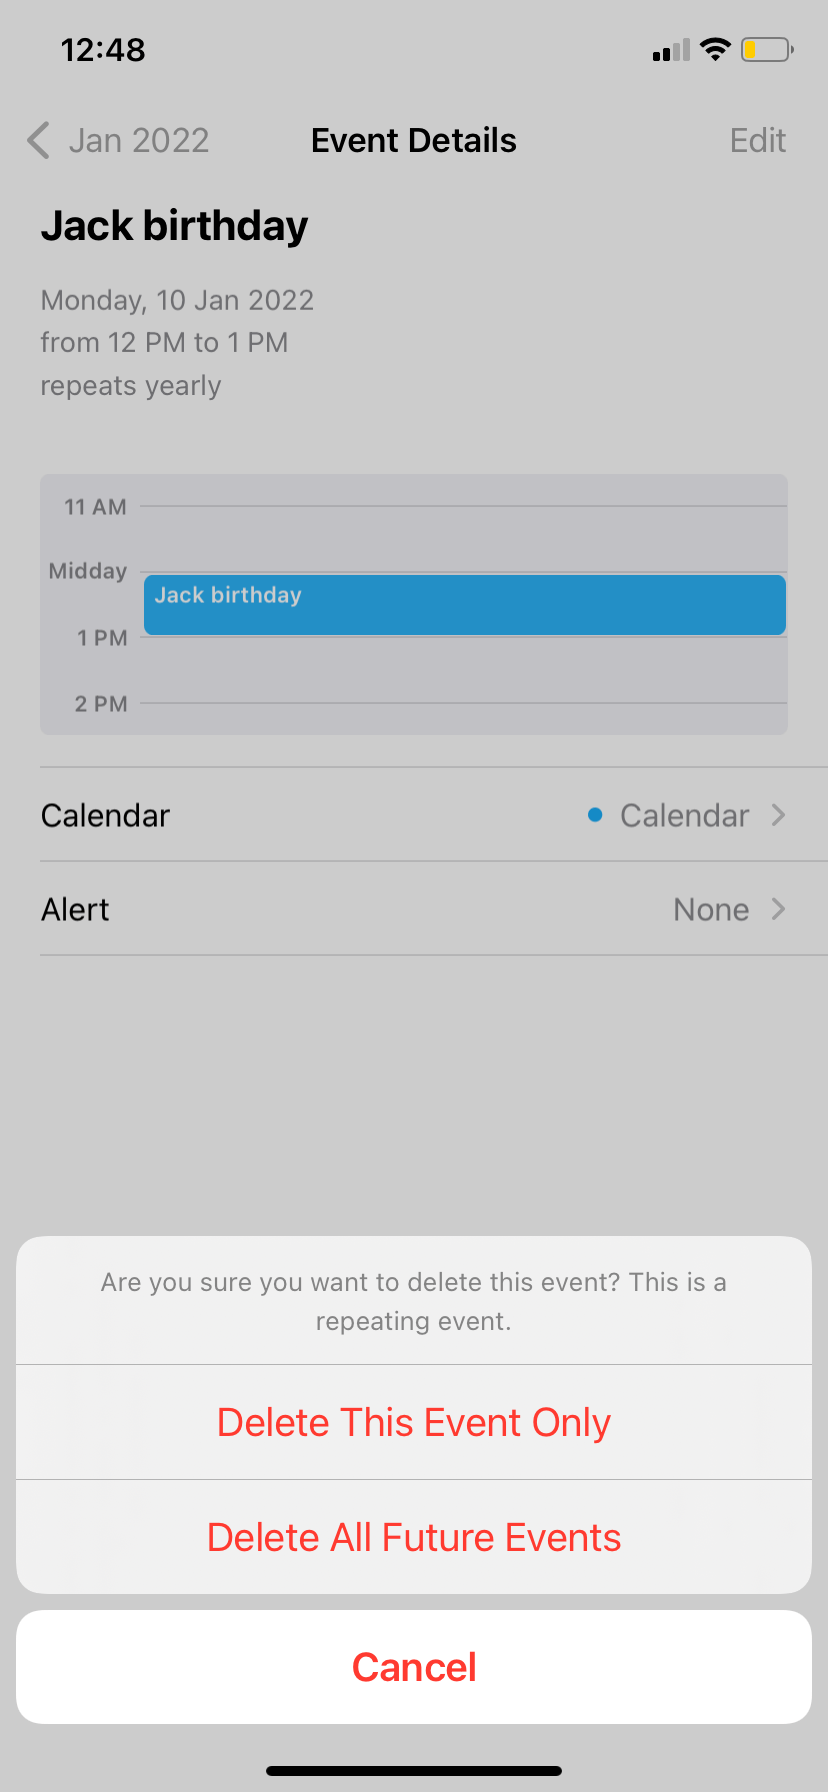 How To Delete Subscribed Calendar Events On iPhone?